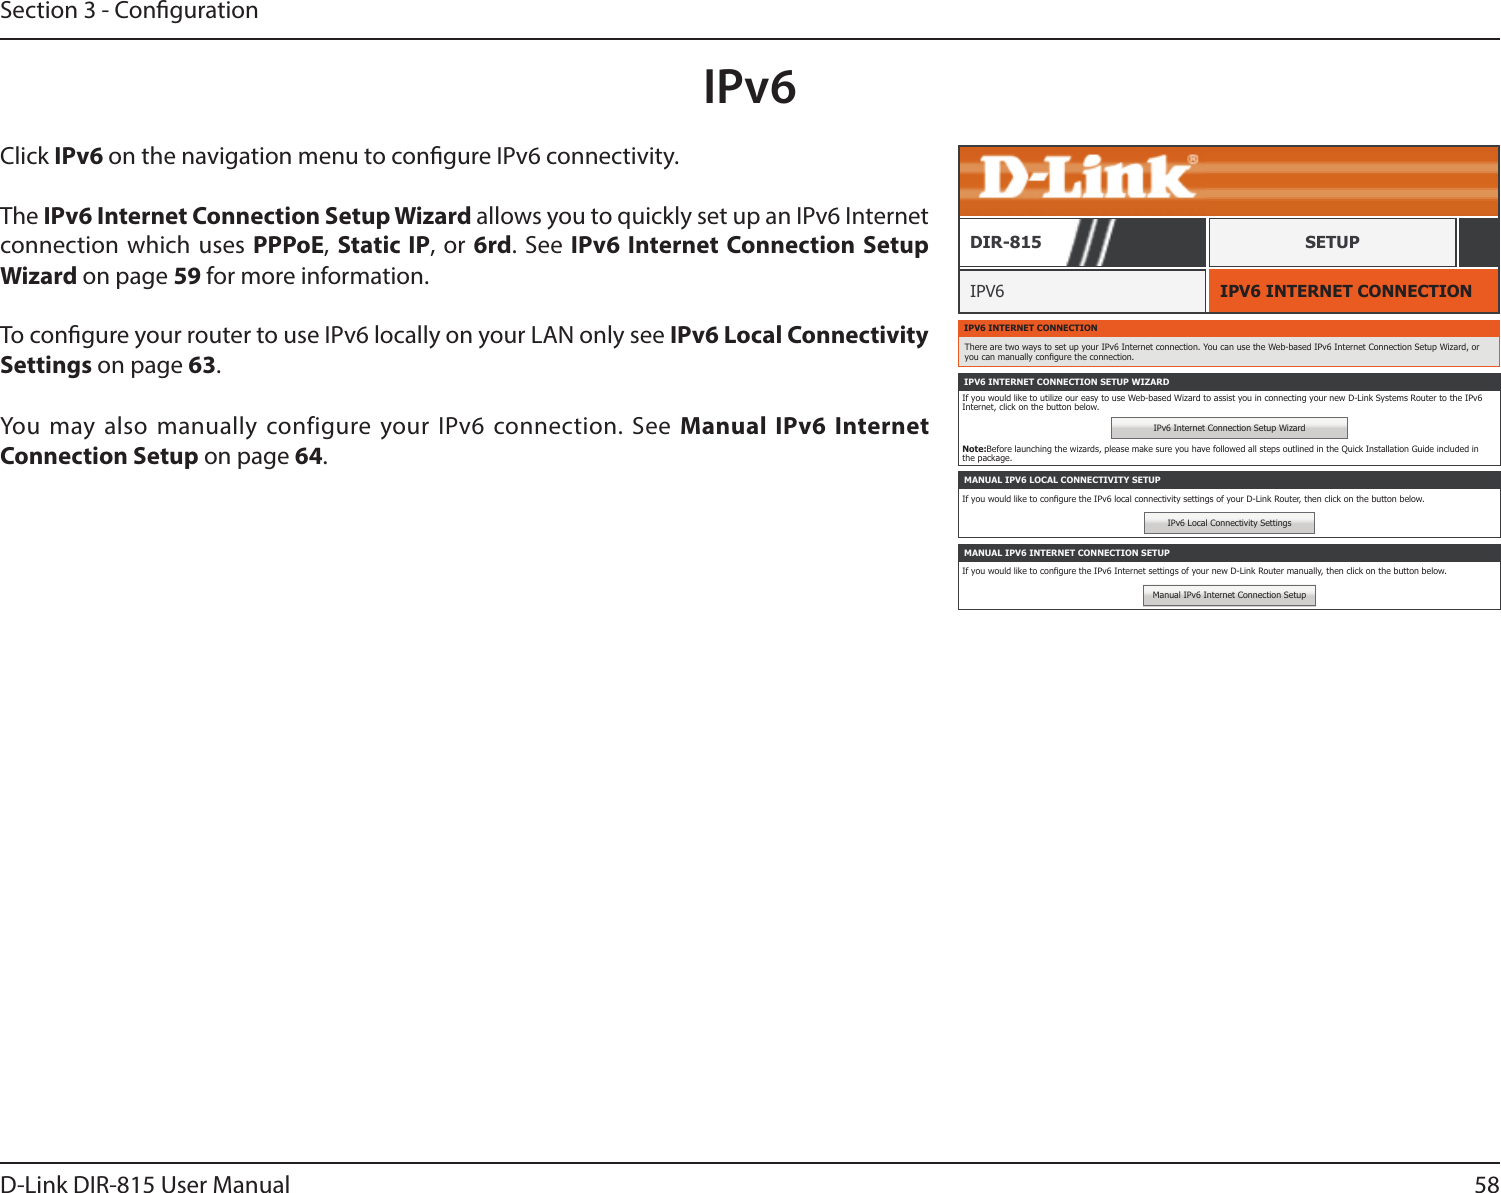 58D-Link DIR-815 User ManualSection 3 - CongurationIPv6IPV6 INTERNET CONNECTIONIPV6DIR-815 SETUPClick IPv6 on the navigation menu to congure IPv6 connectivity.The IPv6 Internet Connection Setup Wizard allows you to quickly set up an IPv6 Internet connection which uses PPPoE, Static IP, or 6rd. See IPv6 Internet Connection Setup Wizard on page 59 for more information.To congure your router to use IPv6 locally on your LAN only see IPv6 Local Connectivity Settings on page 63.You may also manually configure your IPv6 connection. See Manual IPv6 Internet Connection Setup on page 64.IPV6 INTERNET CONNECTIONThere are two ways to set up your IPv6 Internet connection. You can use the Web-based IPv6 Internet Connection Setup Wizard, or you can manually congure the connection.IPV6 INTERNET CONNECTION SETUP WIZARDIf you would like to utilize our easy to use Web-based Wizard to assist you in connecting your new D-Link Systems Router to the IPv6 Internet, click on the button below.IPv6 Internet Connection Setup WizardNote:Before launching the wizards, please make sure you have followed all steps outlined in the Quick Installation Guide included in the package.MANUAL IPV6 LOCAL CONNECTIVITY SETUPIf you would like to congure the IPv6 local connectivity settings of your D-Link Router, then click on the button below.IPv6 Local Connectivity SettingsMANUAL IPV6 INTERNET CONNECTION SETUPIf you would like to congure the IPv6 Internet settings of your new D-Link Router manually, then click on the button below.Manual IPv6 Internet Connection Setup